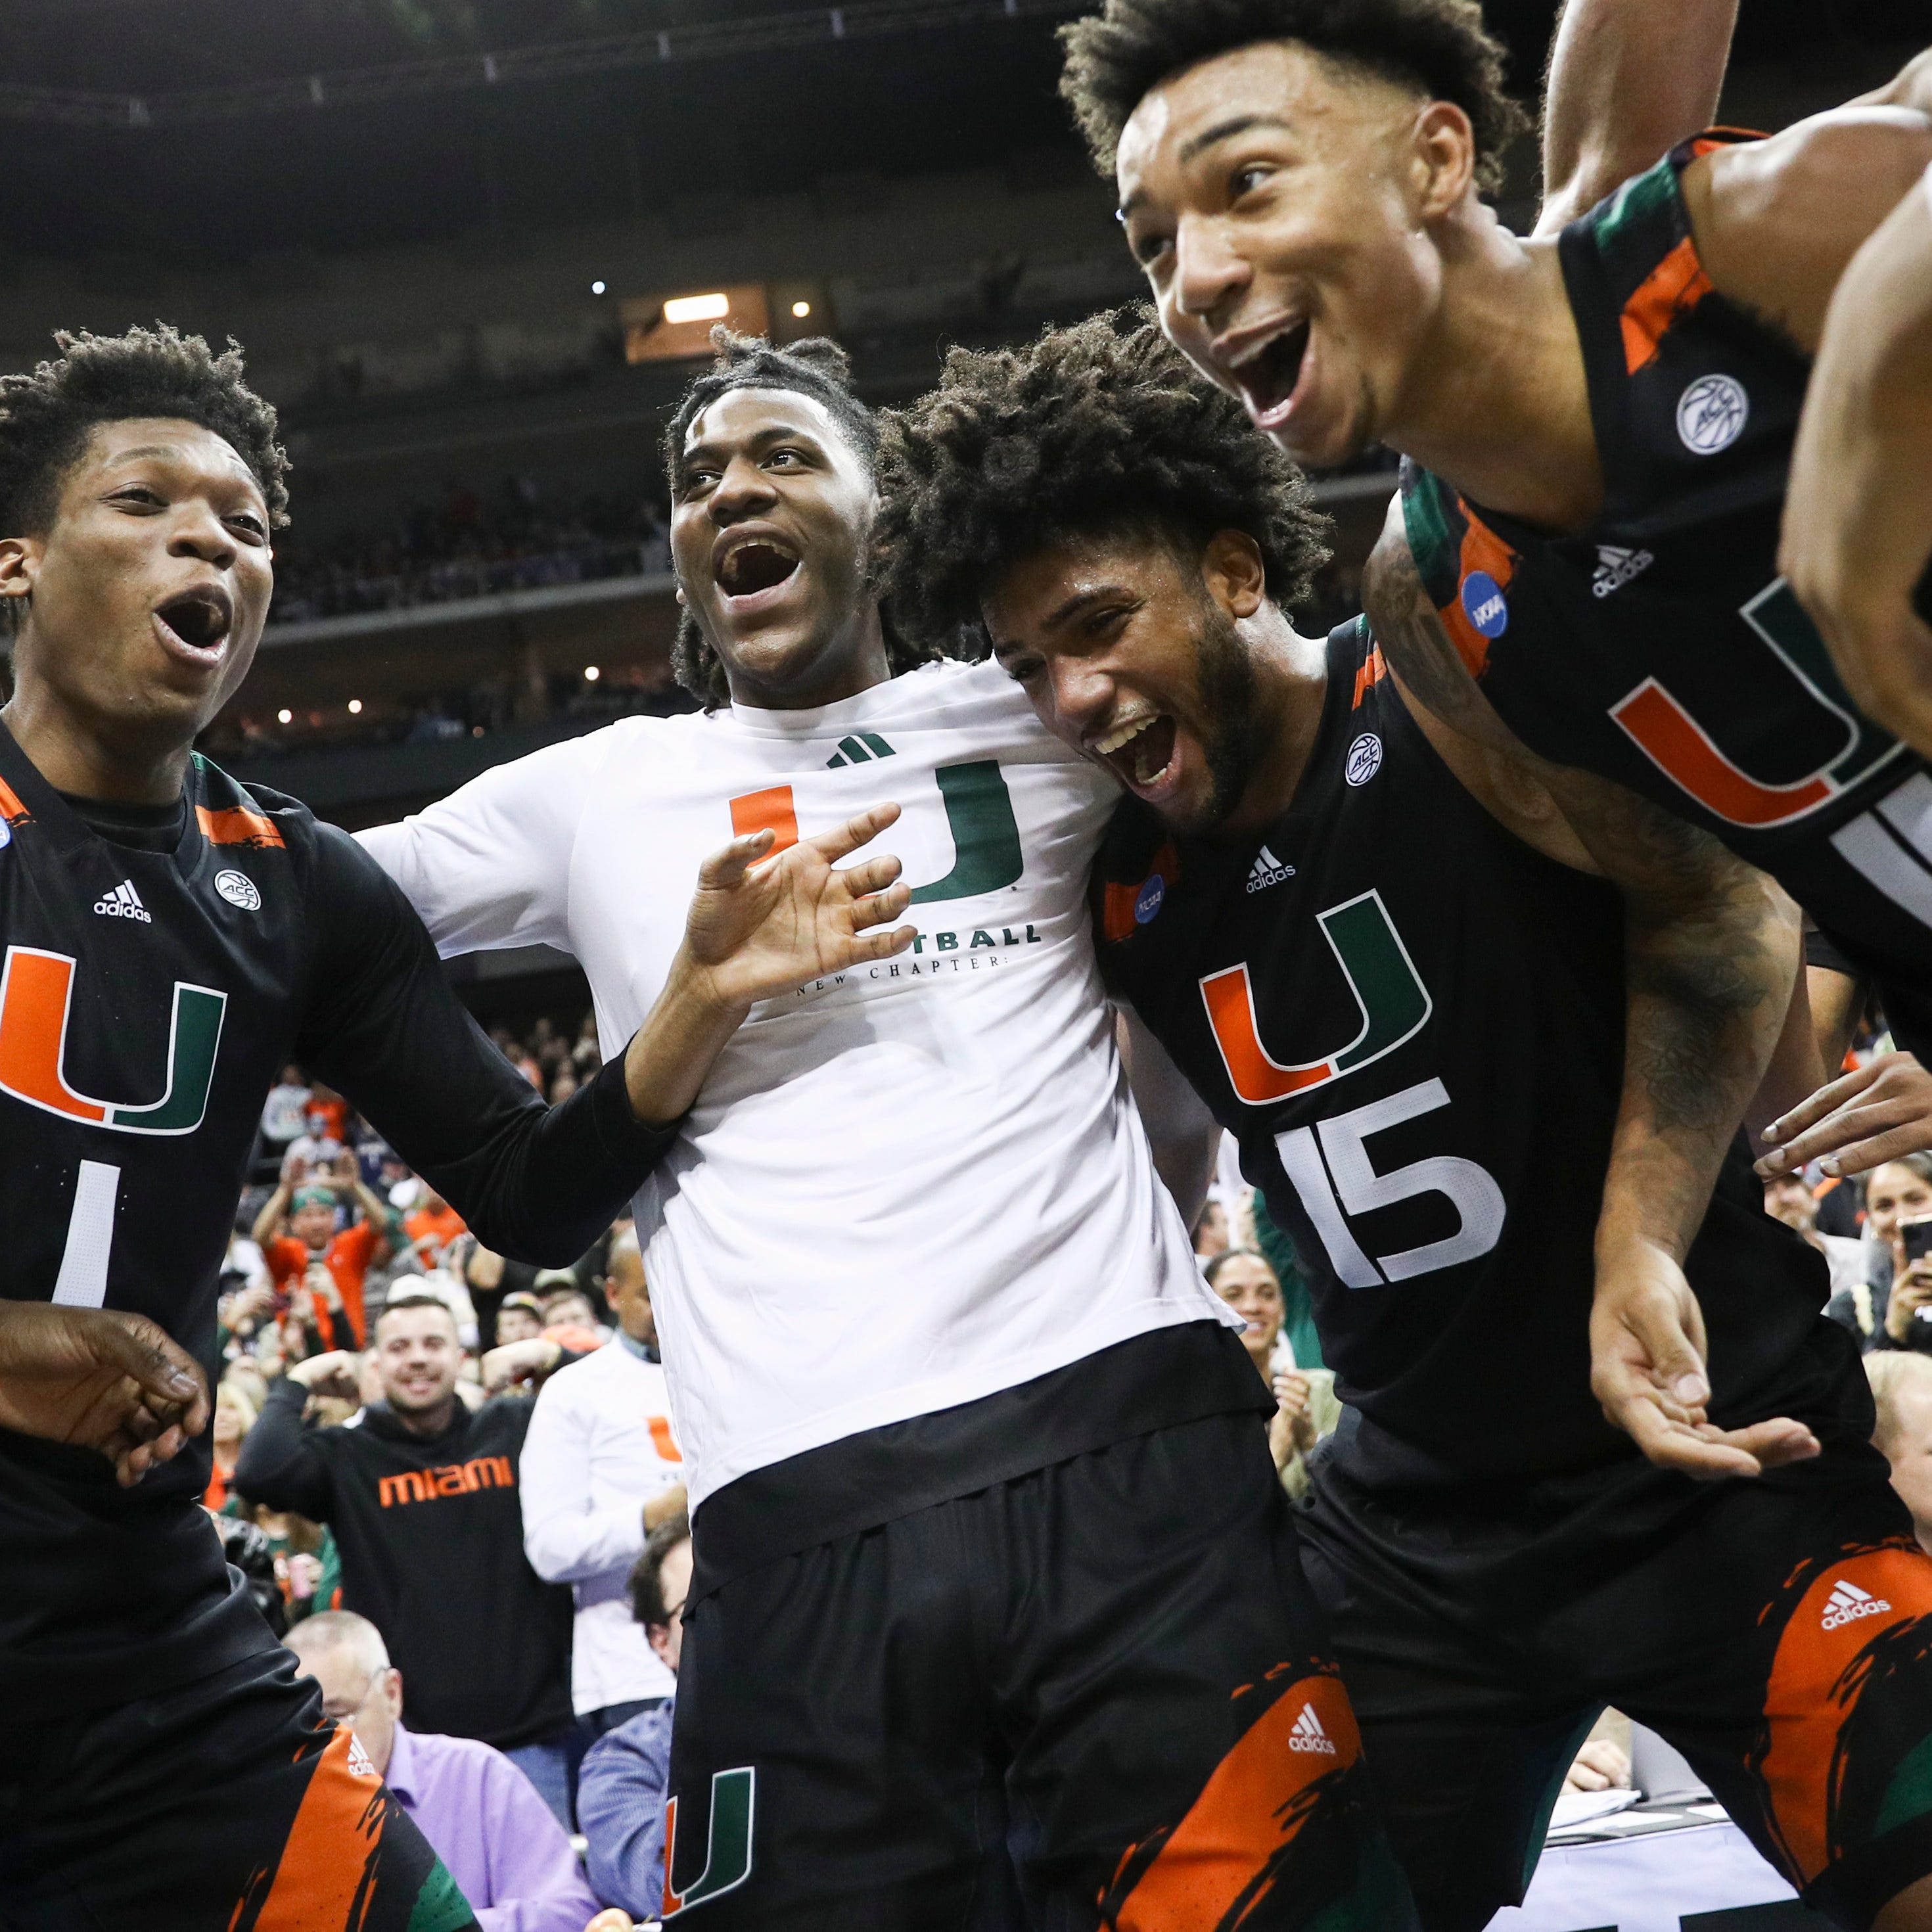 Miami (Fla.) players celebrate following their defeat of Houston in the Sweet 16 of the NCAA men's tournament at T-Mobile Center.